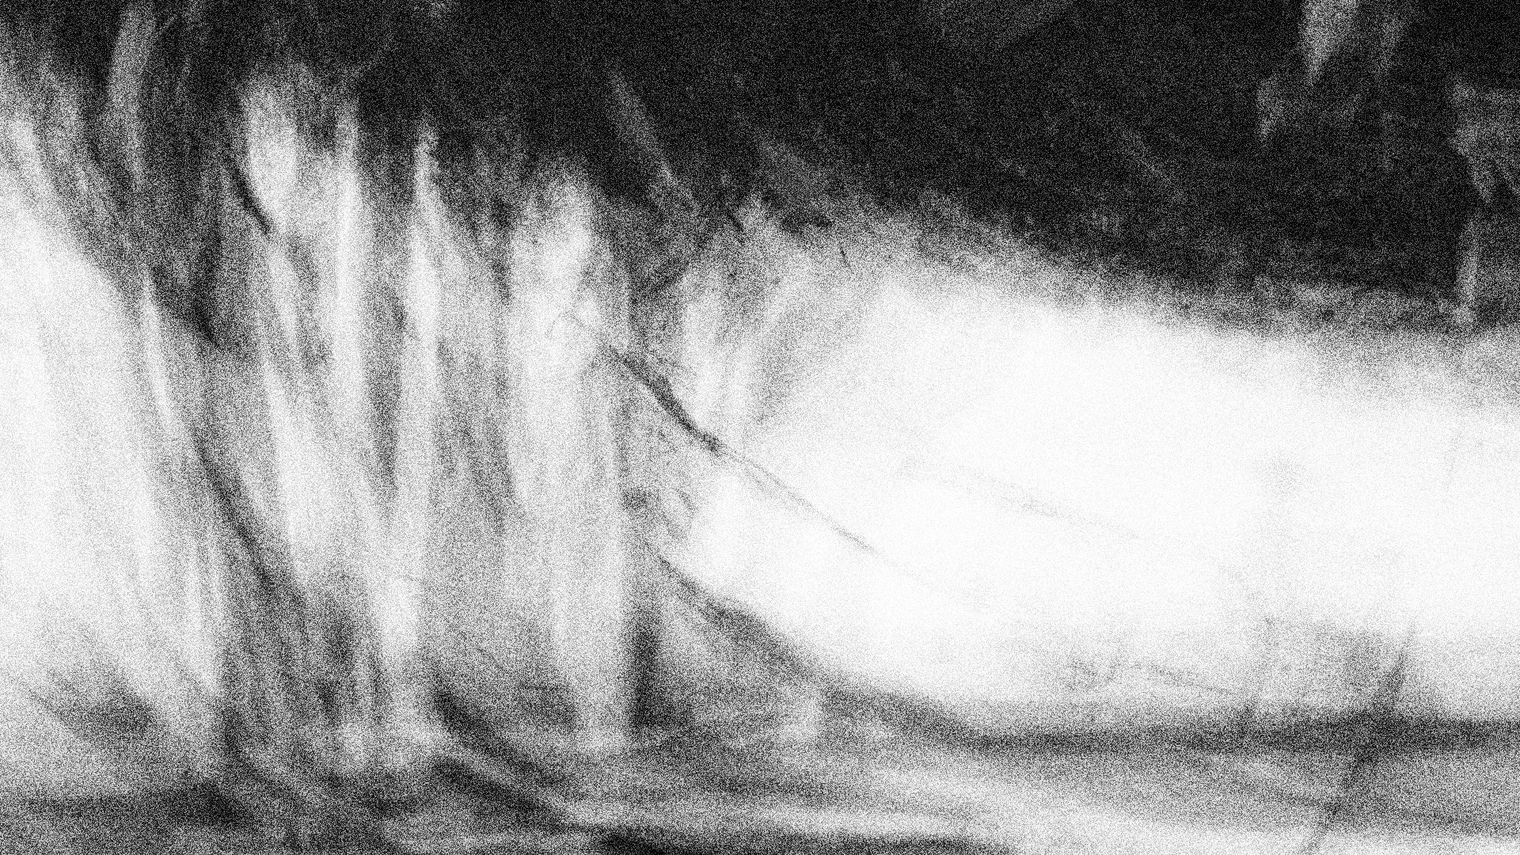 Abstract texture of blurred charcoal lines.